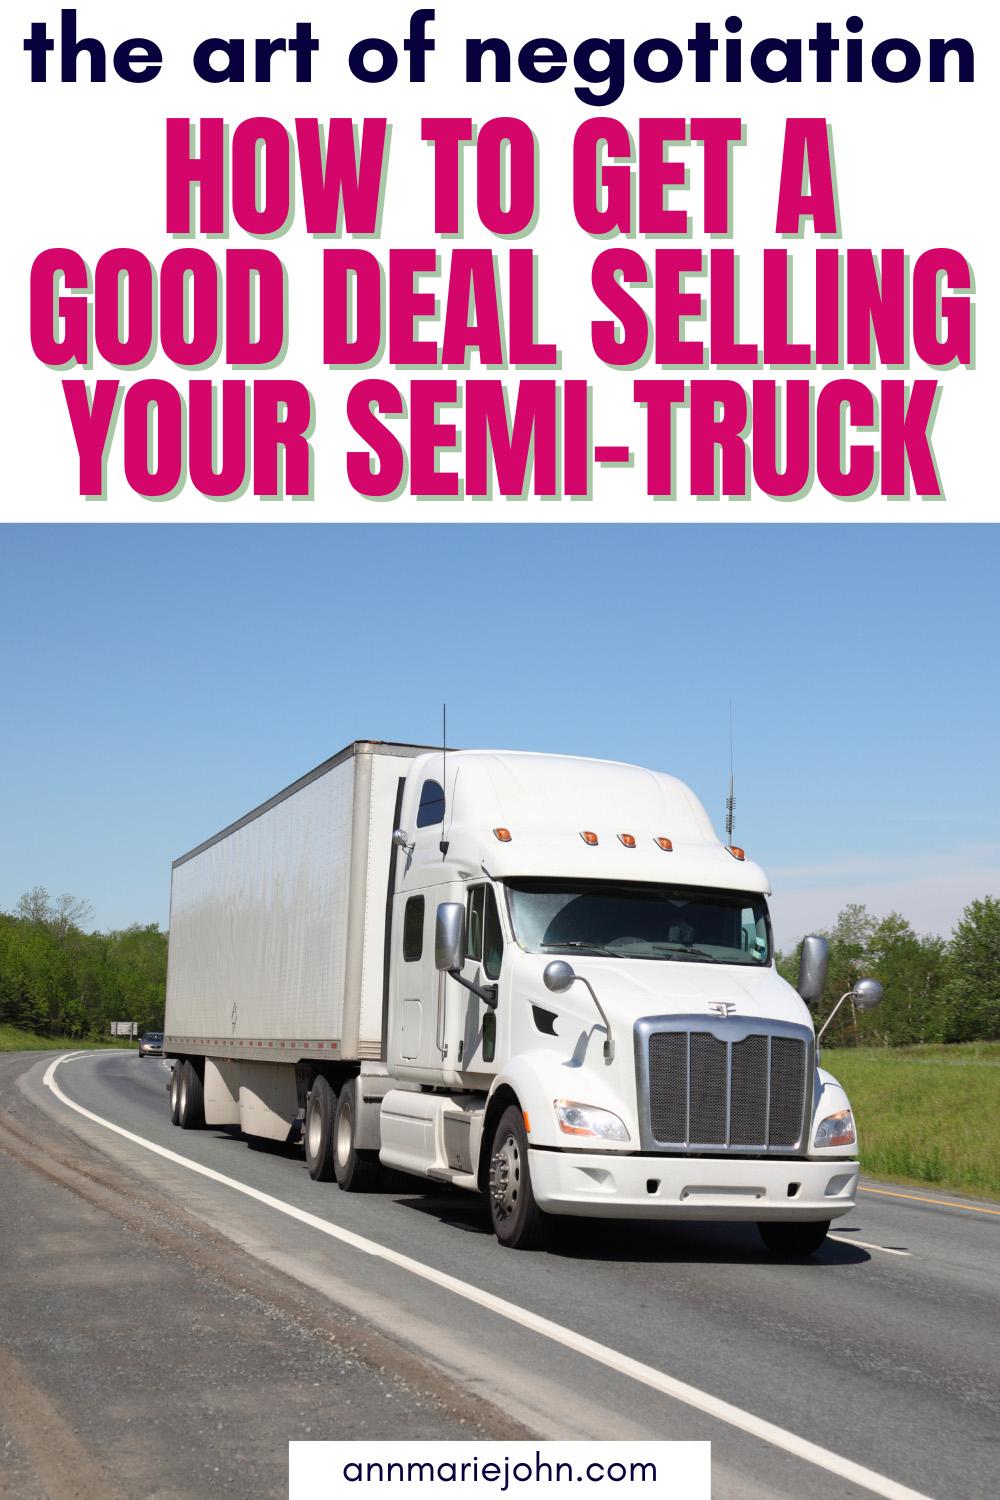 How to Get a Good Deal Selling Your Semi-Truck